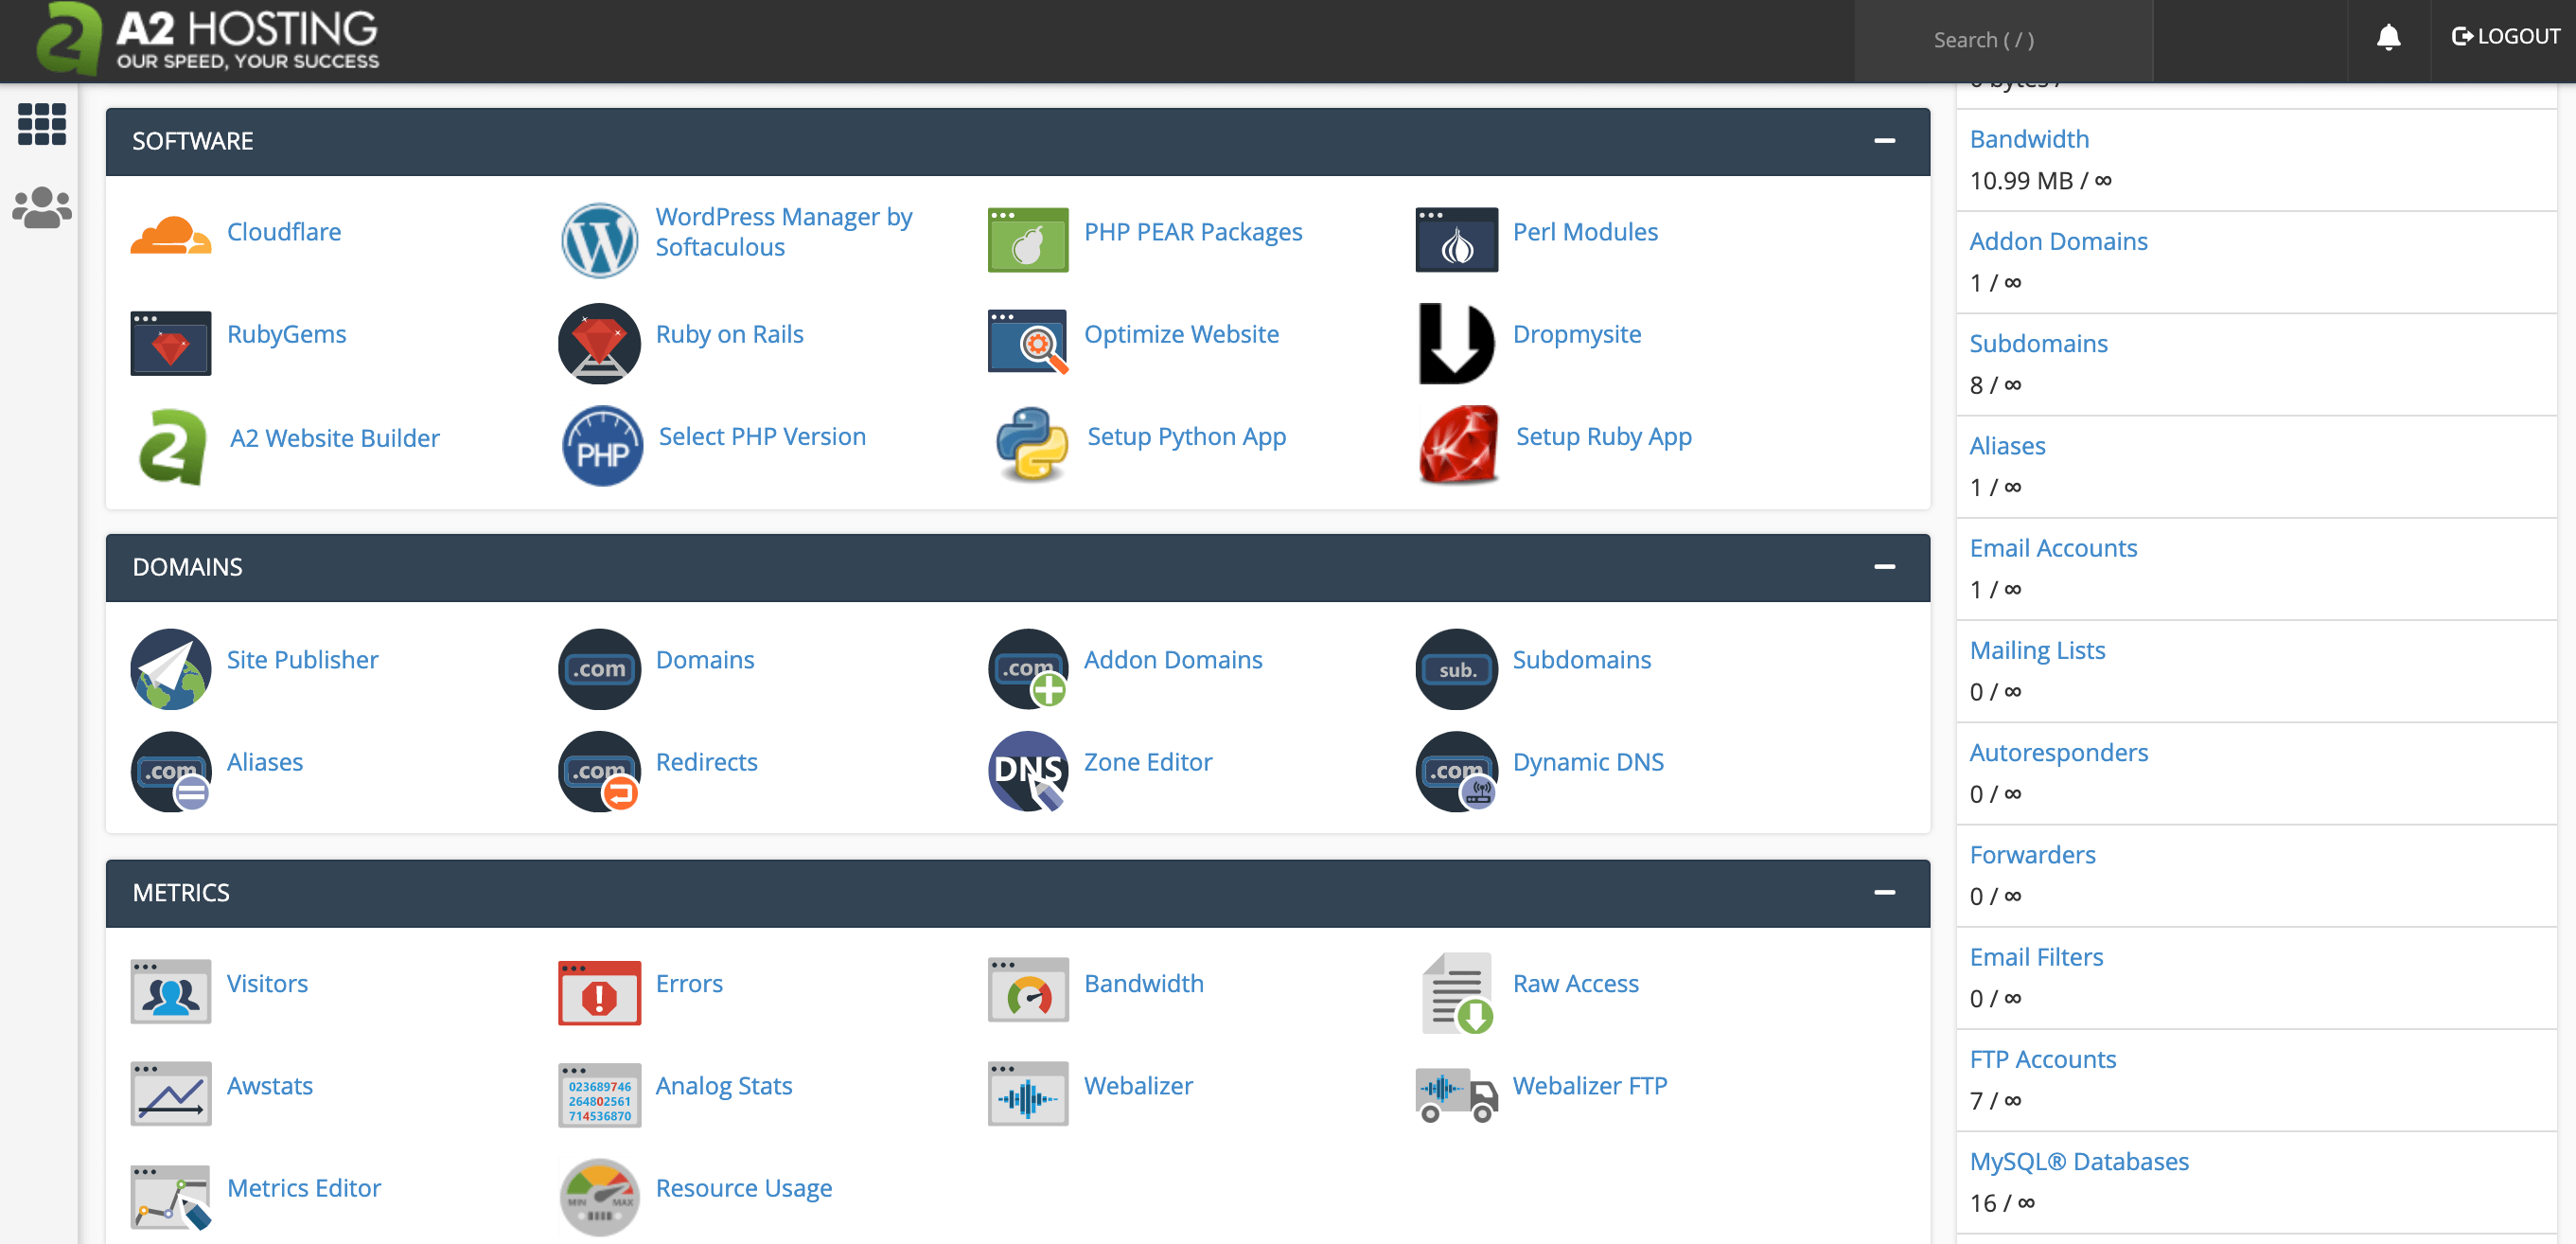 The A2 Hosting cPanel dashboard.